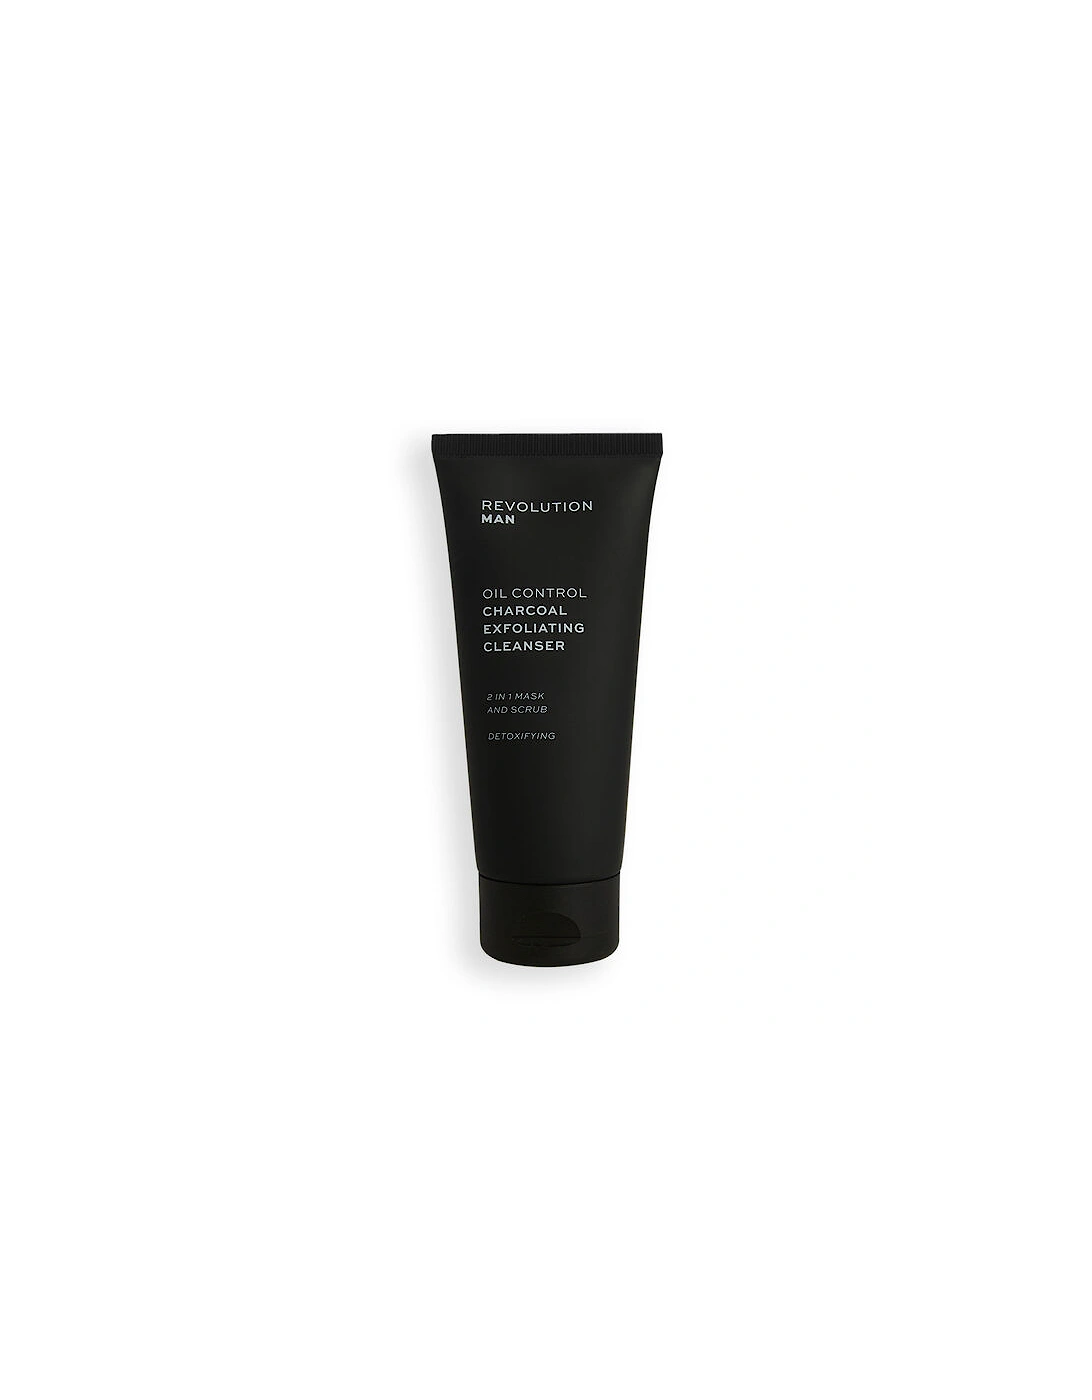 Man Charcoal Exfoliating Cleanser, 2 of 1